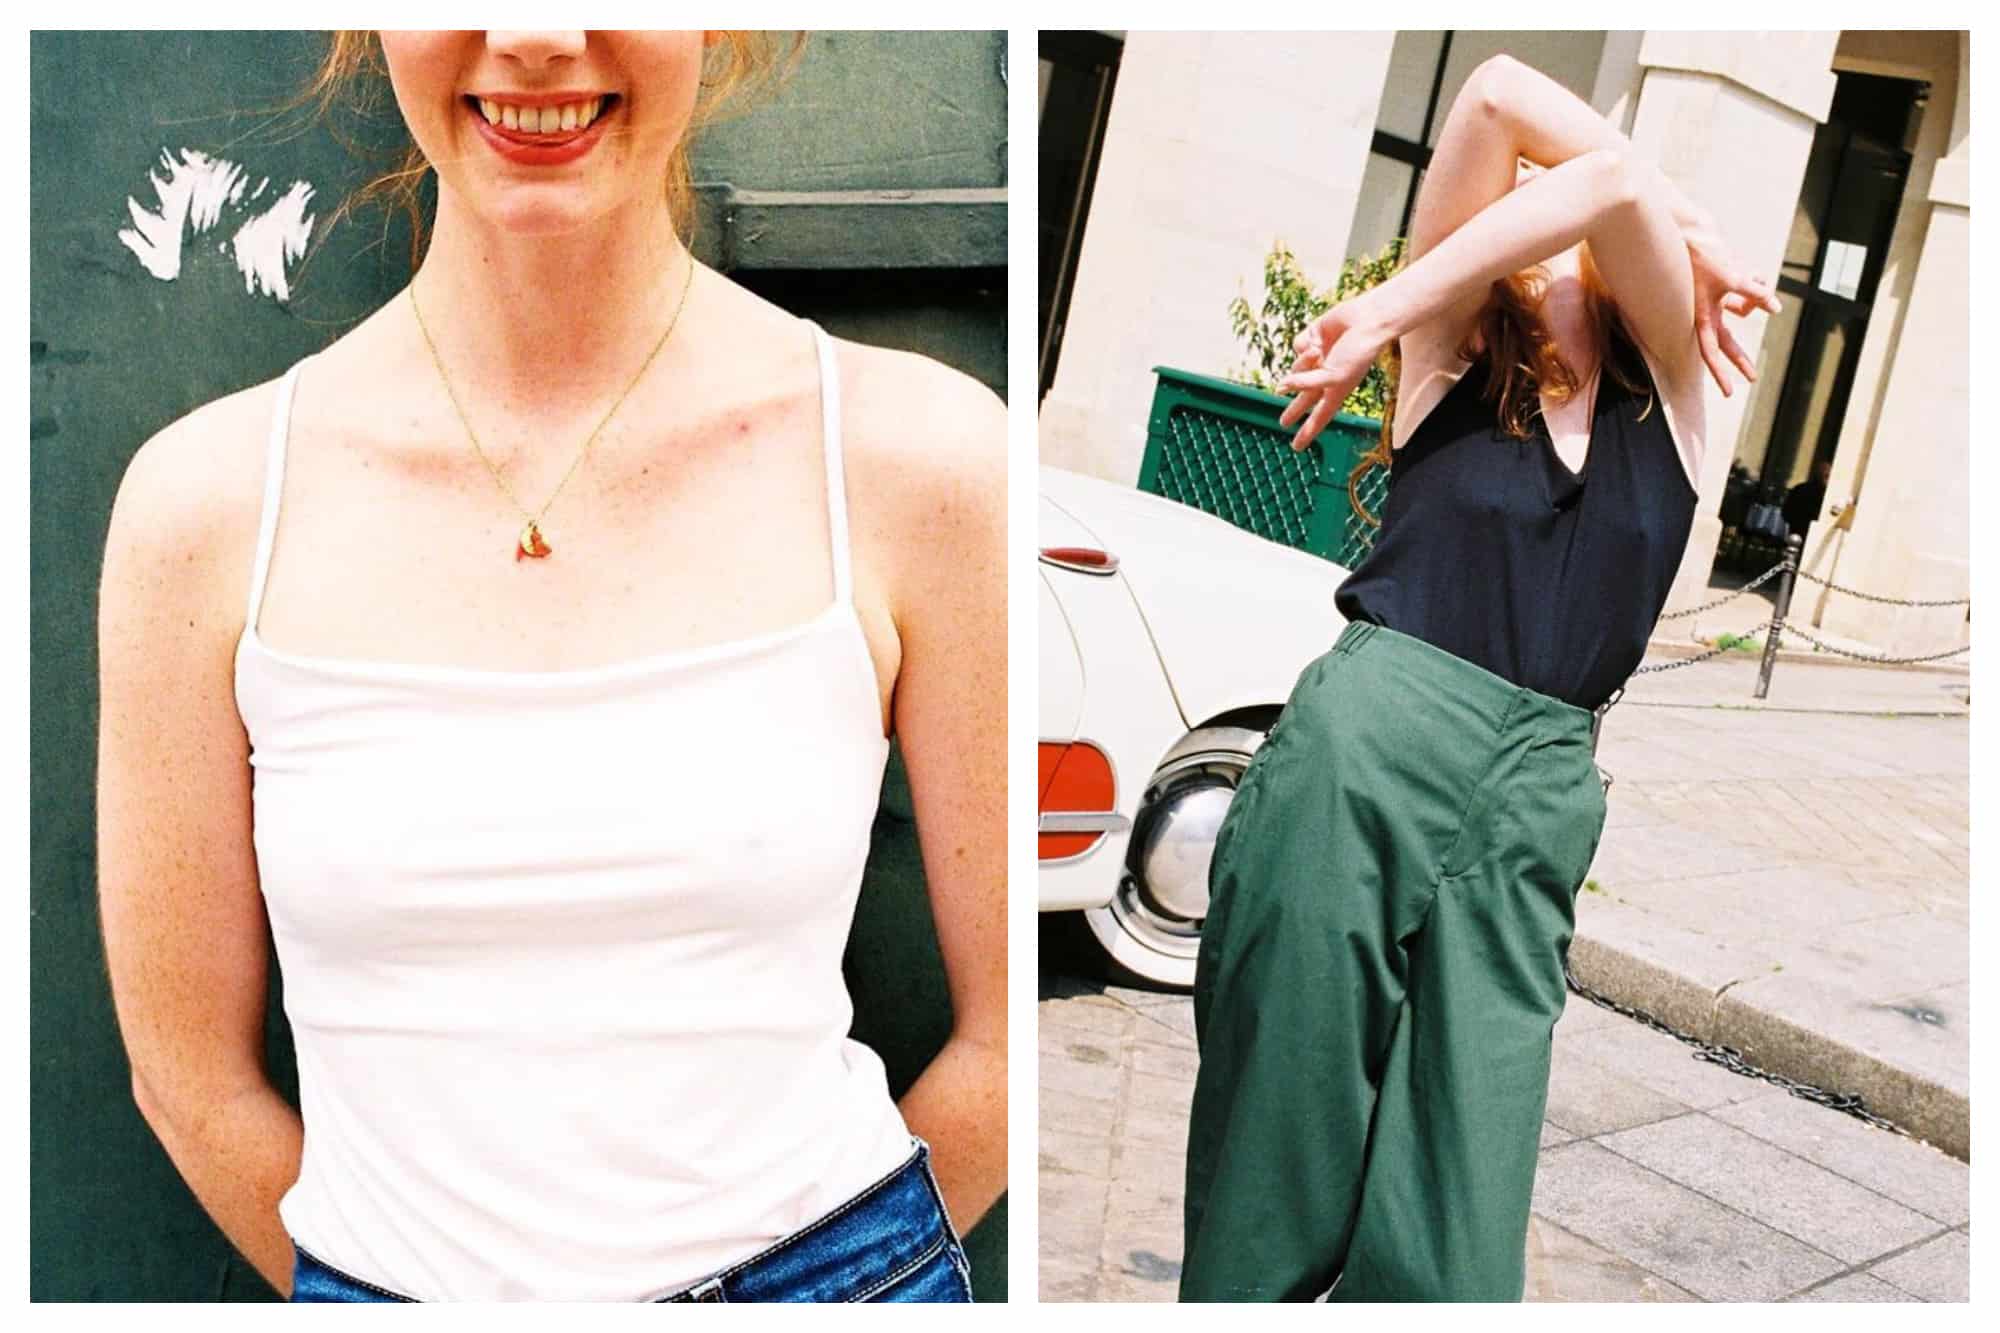 On the left: The photographer captures the model mid-laugh, her red lips parted to show her teeth. She wears a simple spaghetti-strap tank top from the ethical fashion brand Les Sublimes. On the right: A model throws up her arms in a playful manner, throwing back her head. Her black v-neck top and forest green, high-waisted pants from the fashion brand Les Sublimes move with her as she dances in the street. 